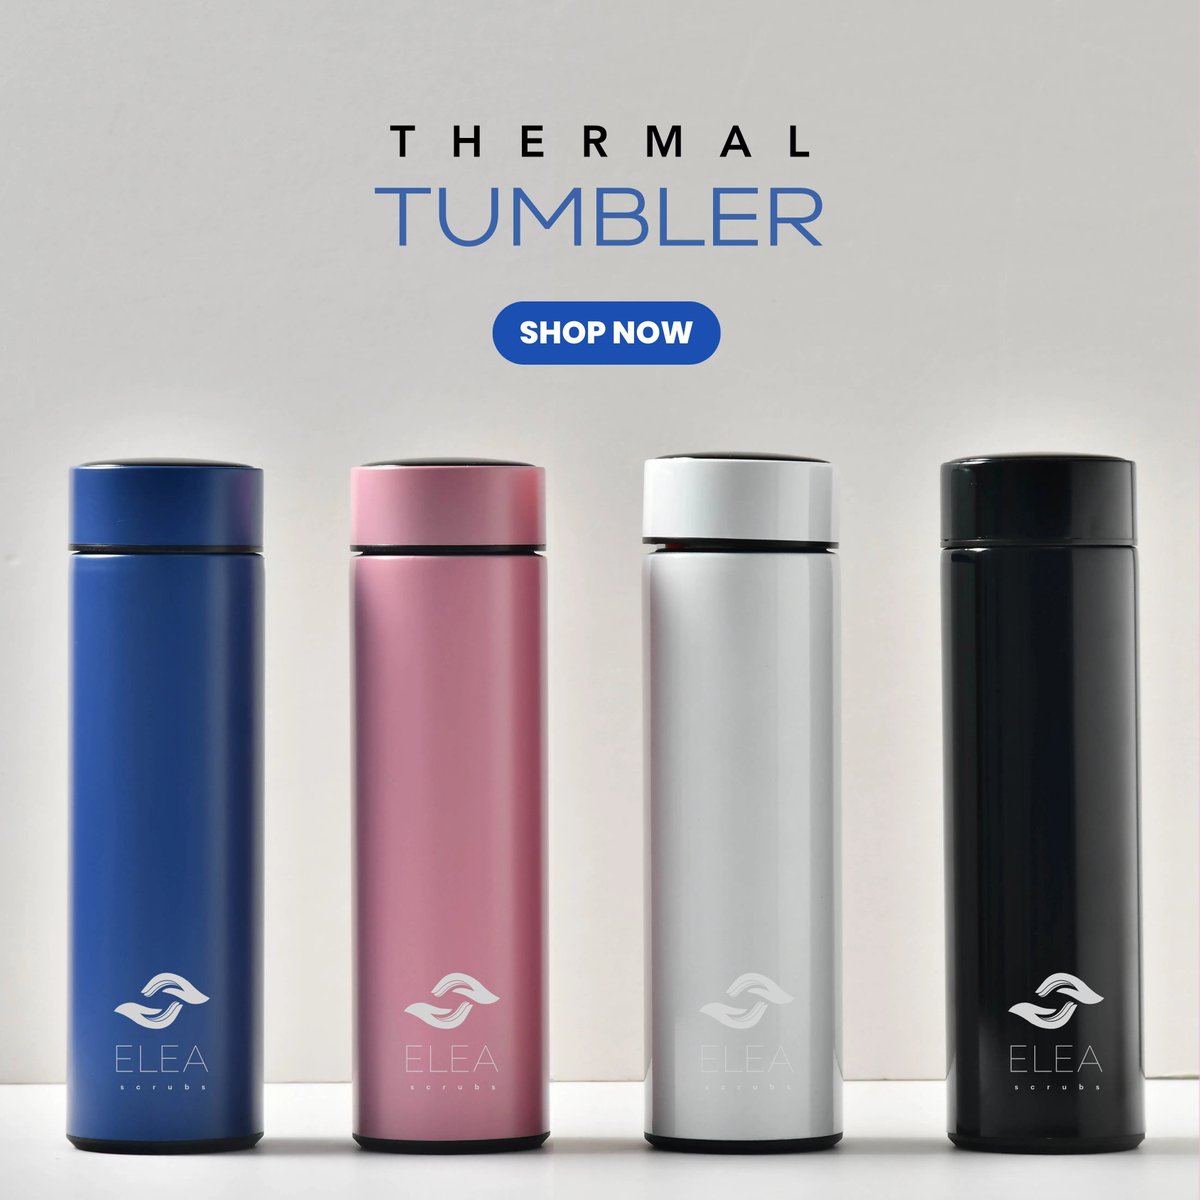 The ultimate companion for healthcare professionals on the go. 💼
⠀
Visit eleascrubs.com for more information 🔥
⠀
#thermaltumbler #tumblerupgrade #medical #beverage #coffee #tumblerlife #thermal #tumbler #tumblers #stayhydrated #thermaltech #accessories #nurses